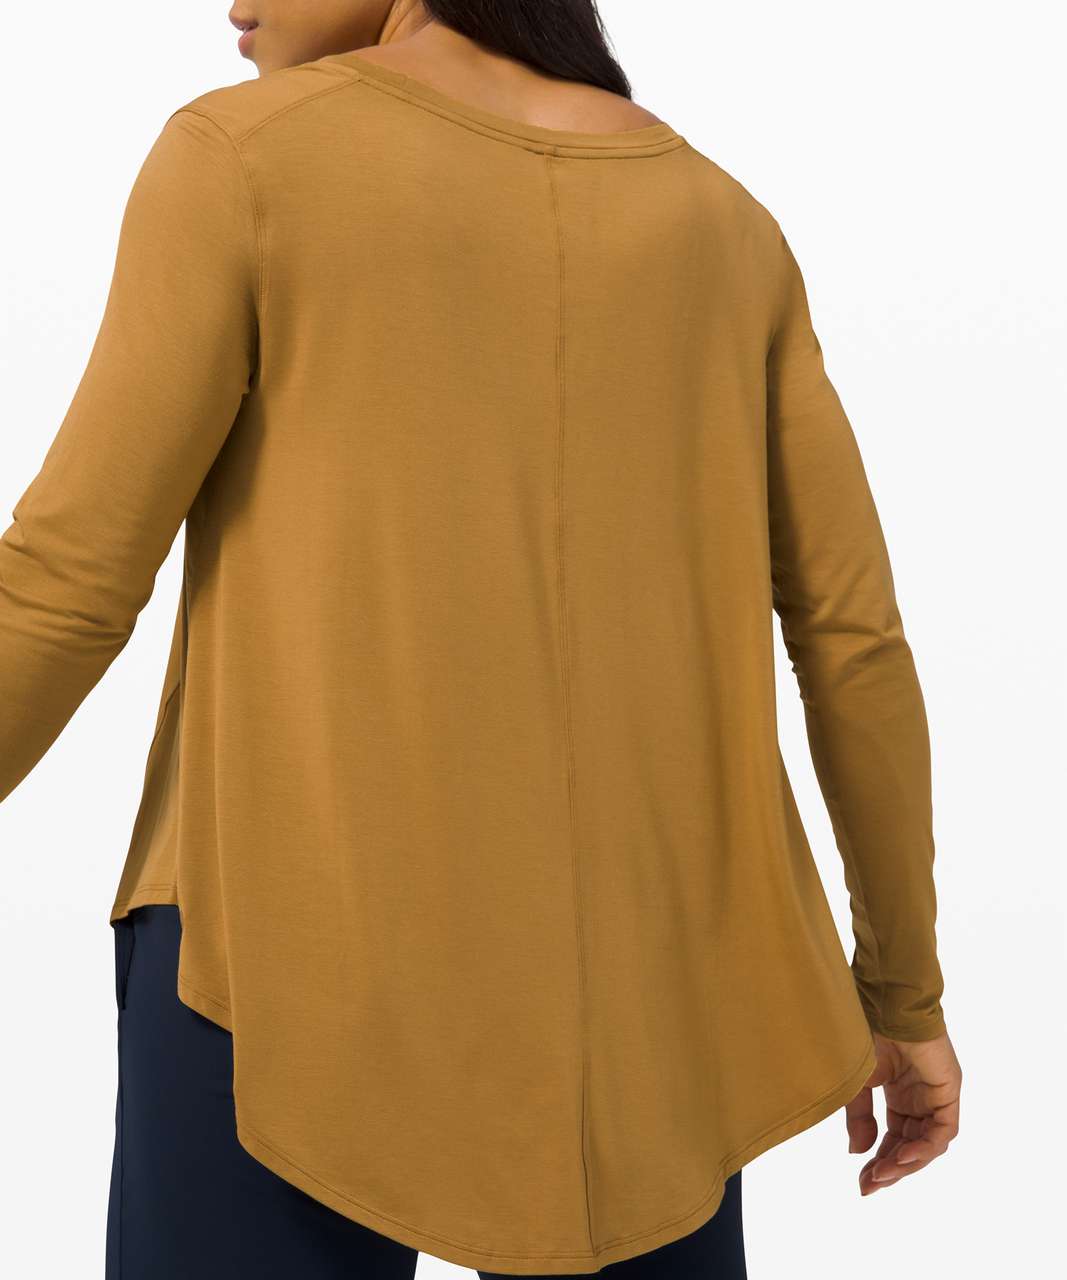 Lululemon Up for Down Time Long Sleeve - Spiced Bronze